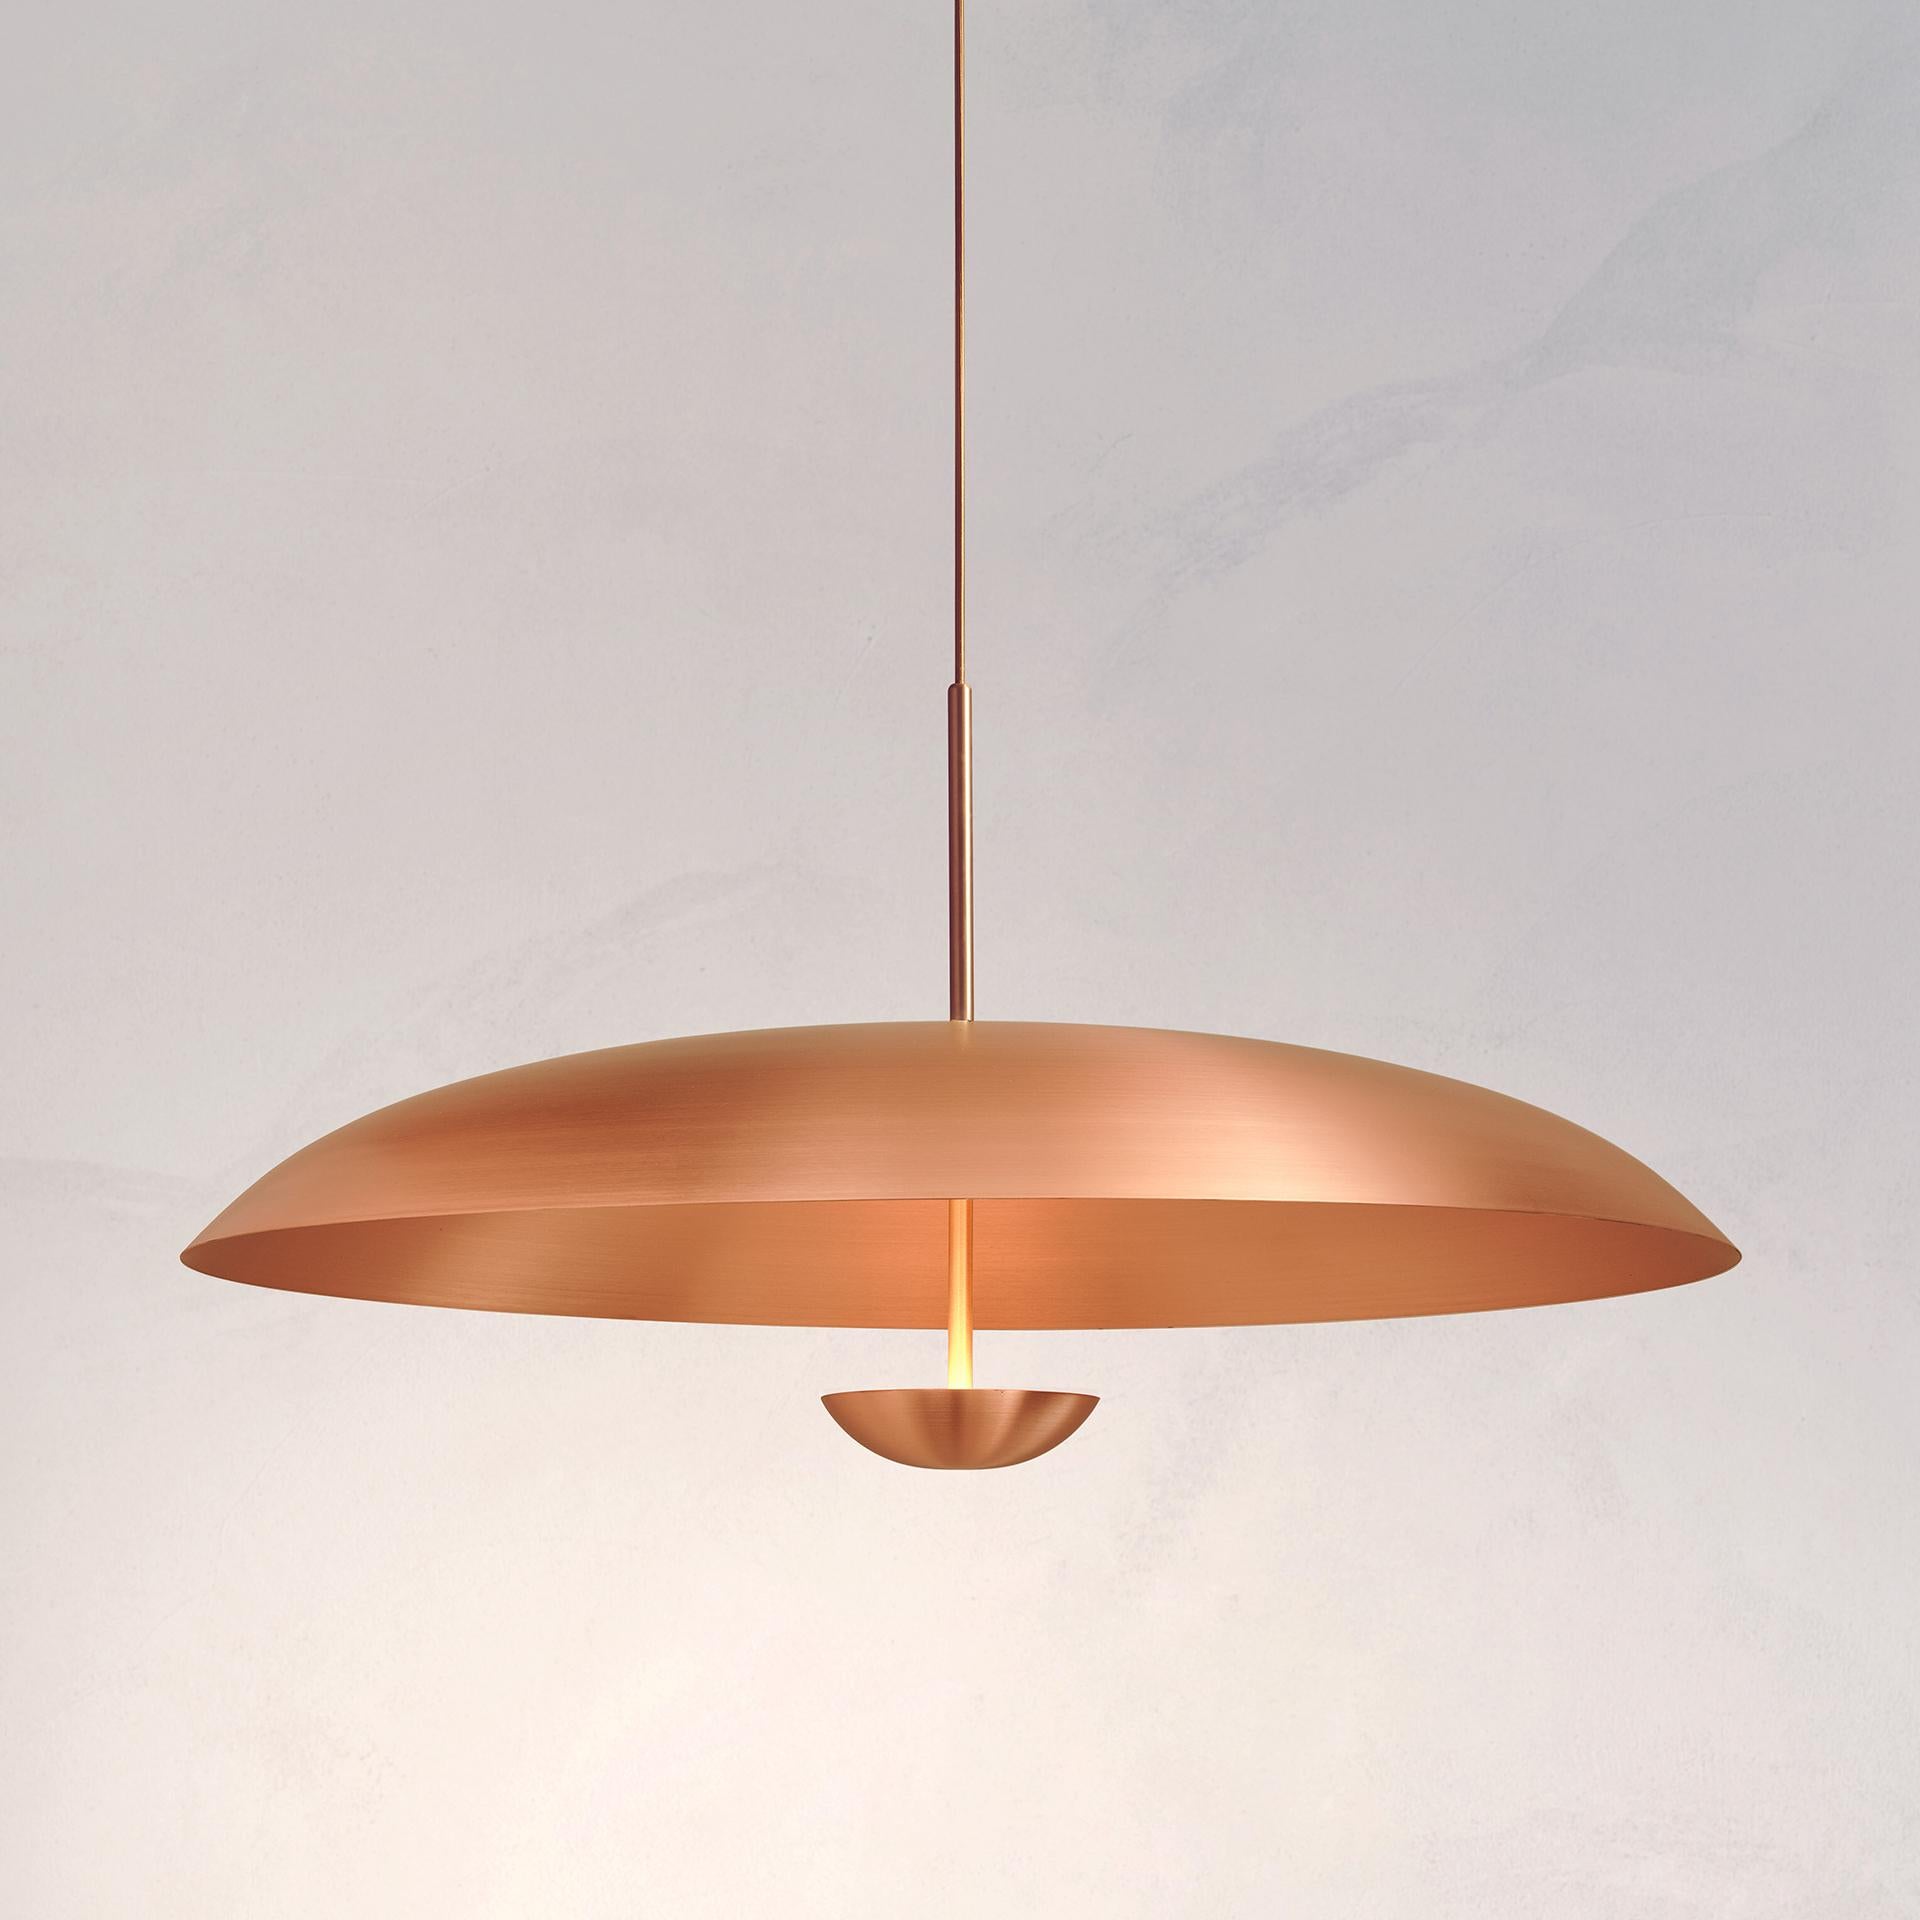 Two finely hand-spun copper plates make up this pendant light,  creating this unique appearance. The light is projected into the shade and reflects out, illuminating without creating a glare.
 
This light fixture is suitable for both contemporary